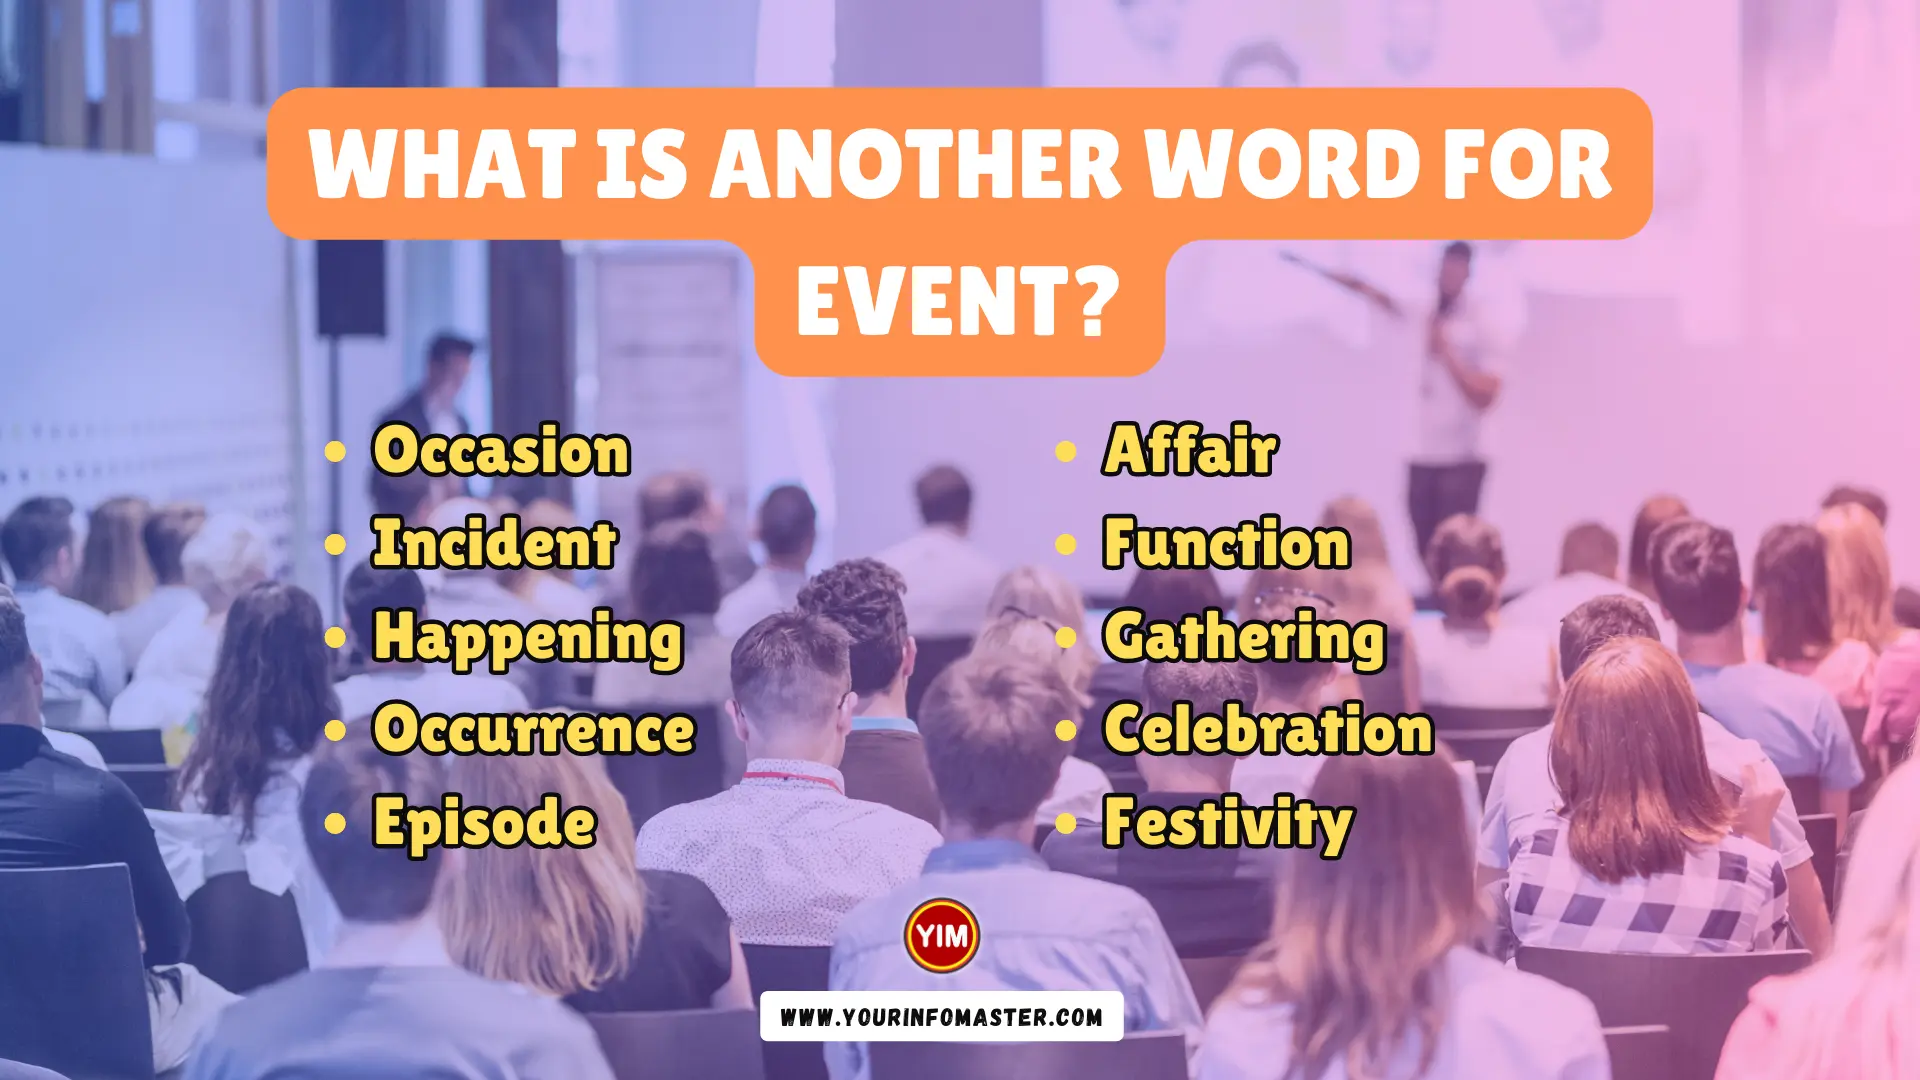 What is another word for Event